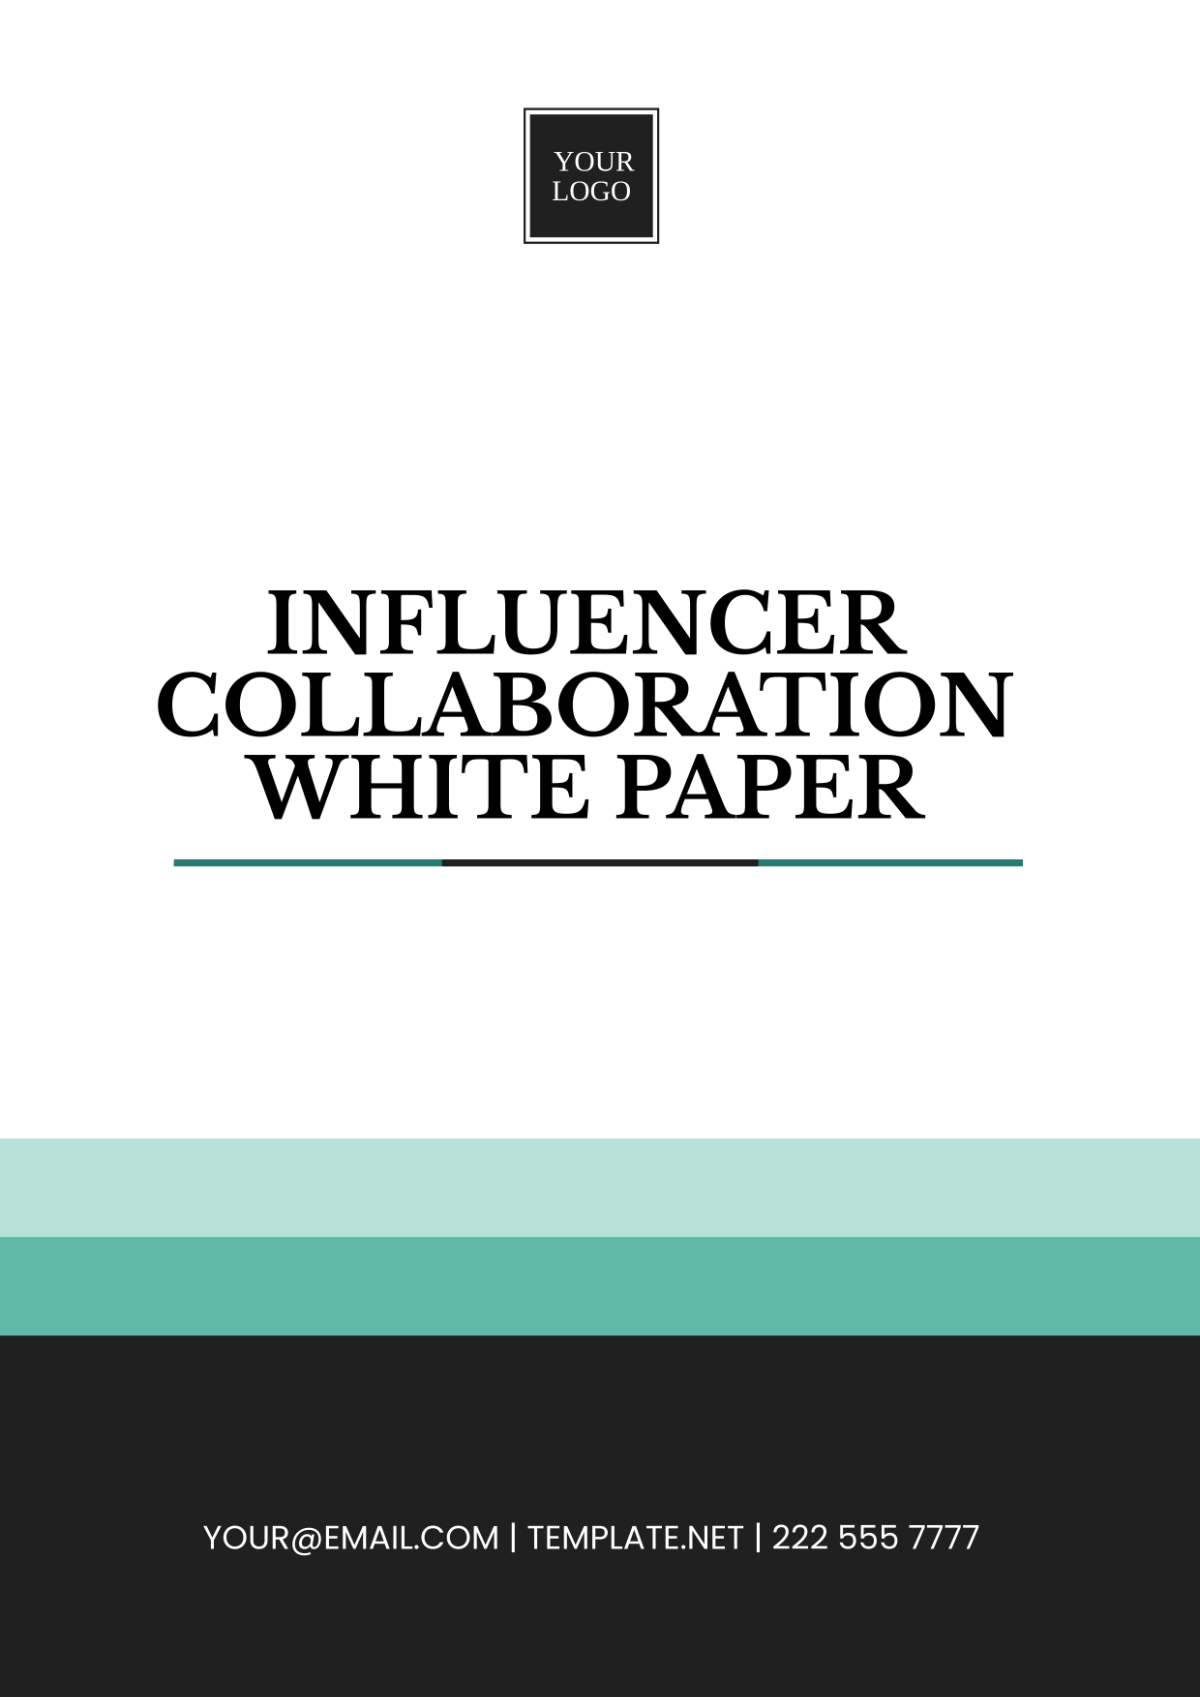 Influencer Collaboration White Paper Template